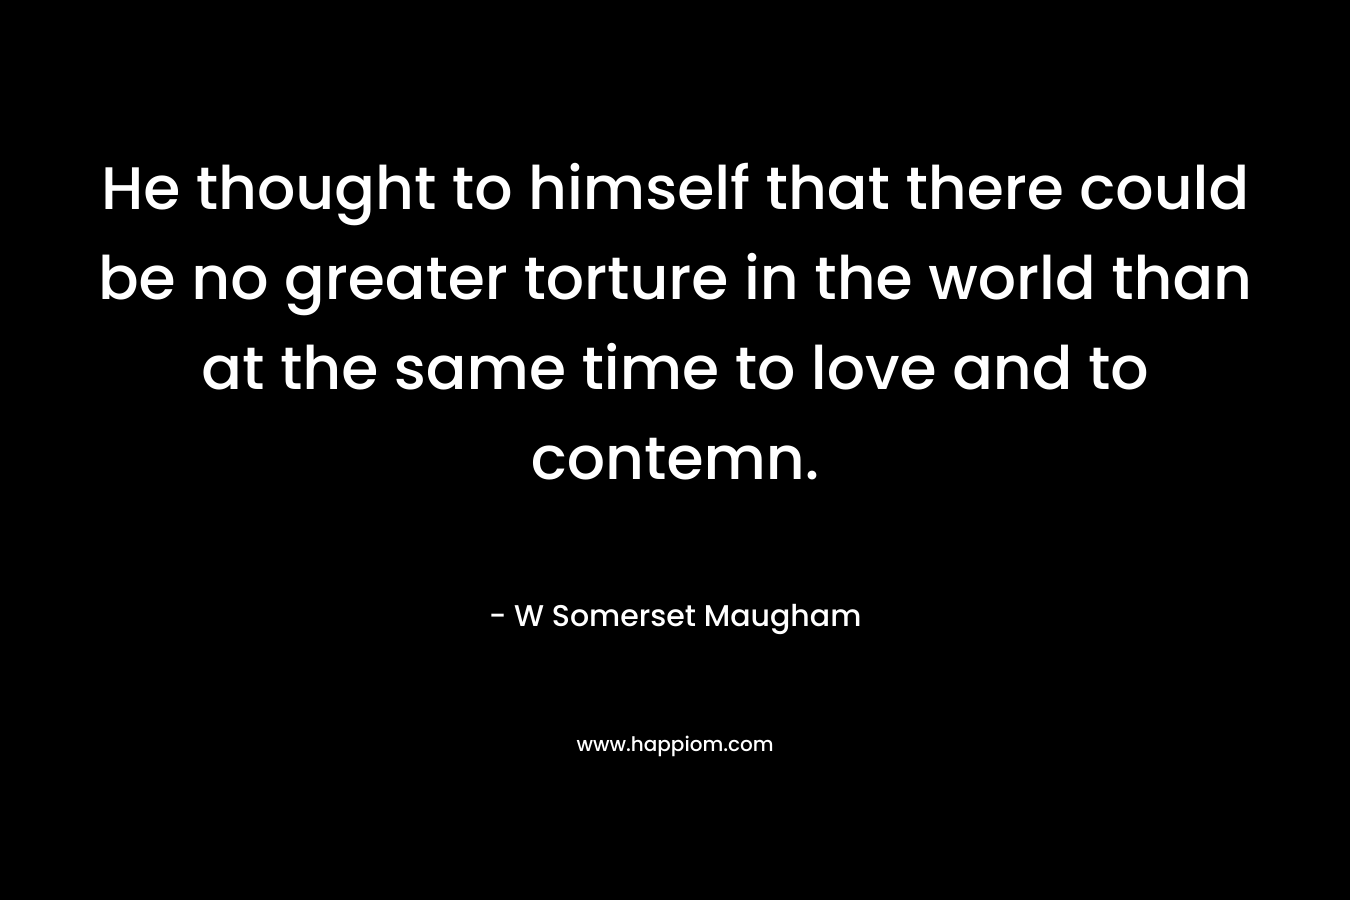 He thought to himself that there could be no greater torture in the world than at the same time to love and to contemn. – W Somerset Maugham